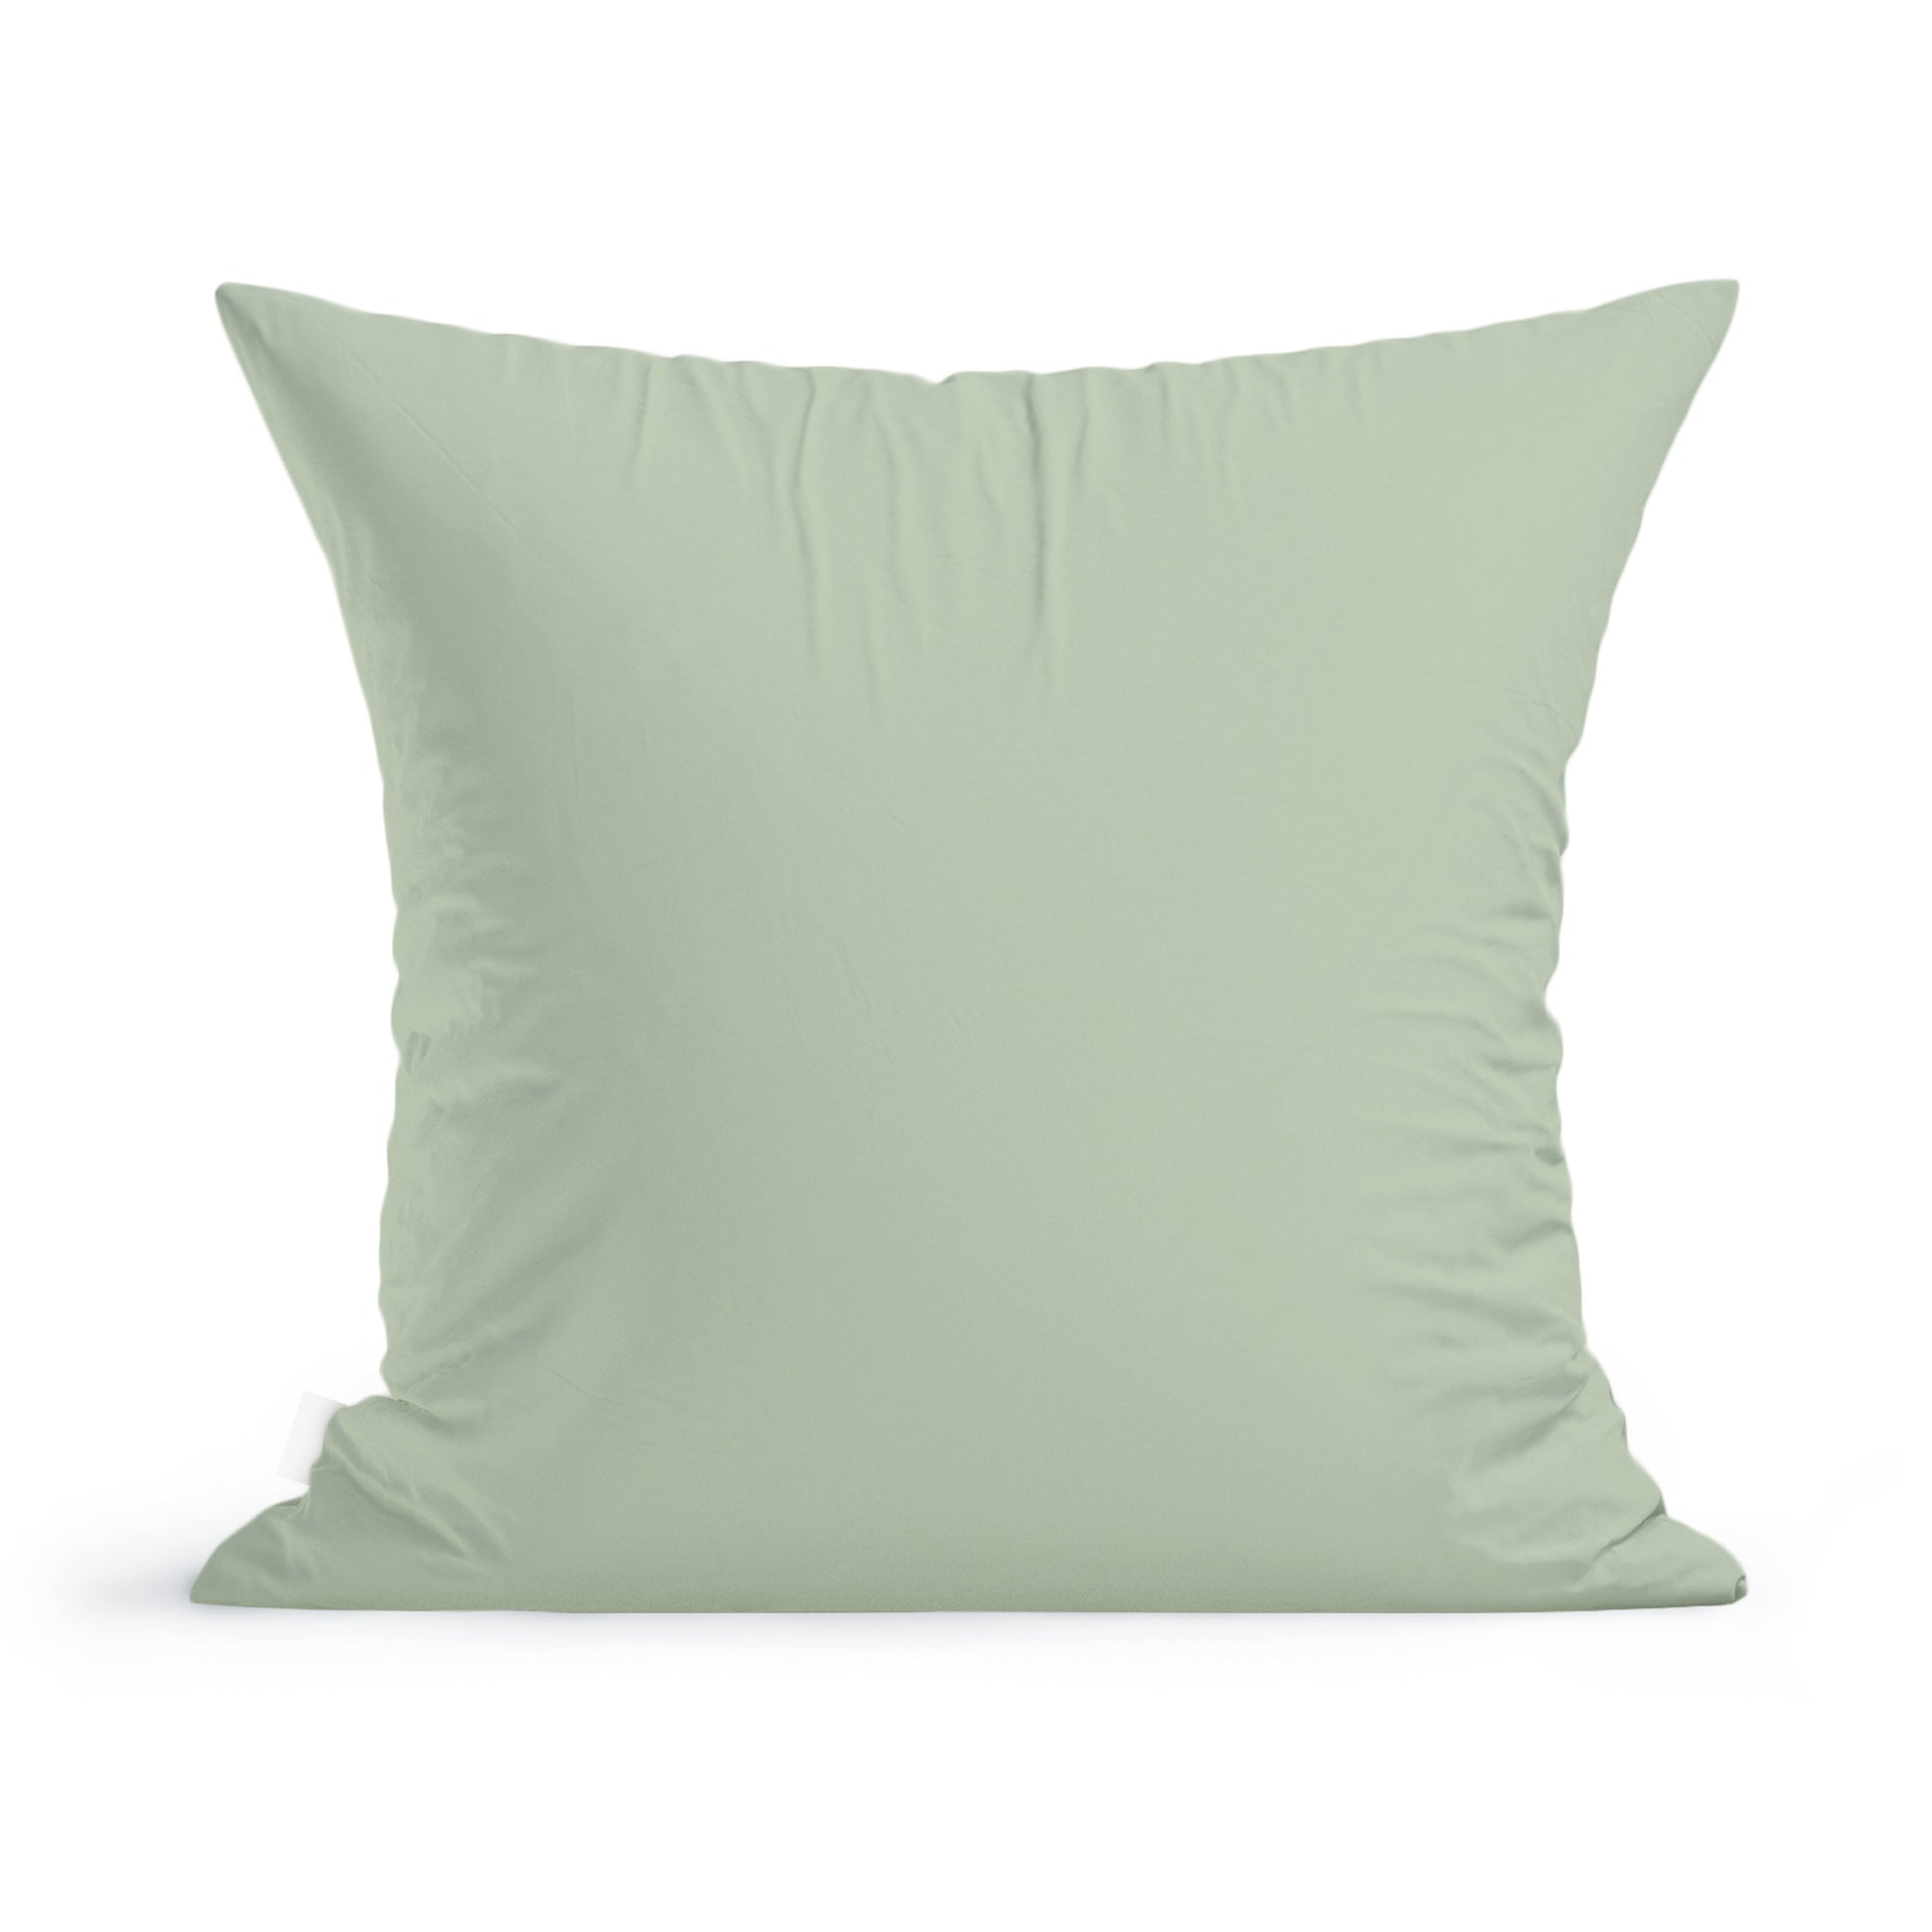 A plain light green 100% cotton Wild Daisies Pillow by Rustic County isolated on a white background.